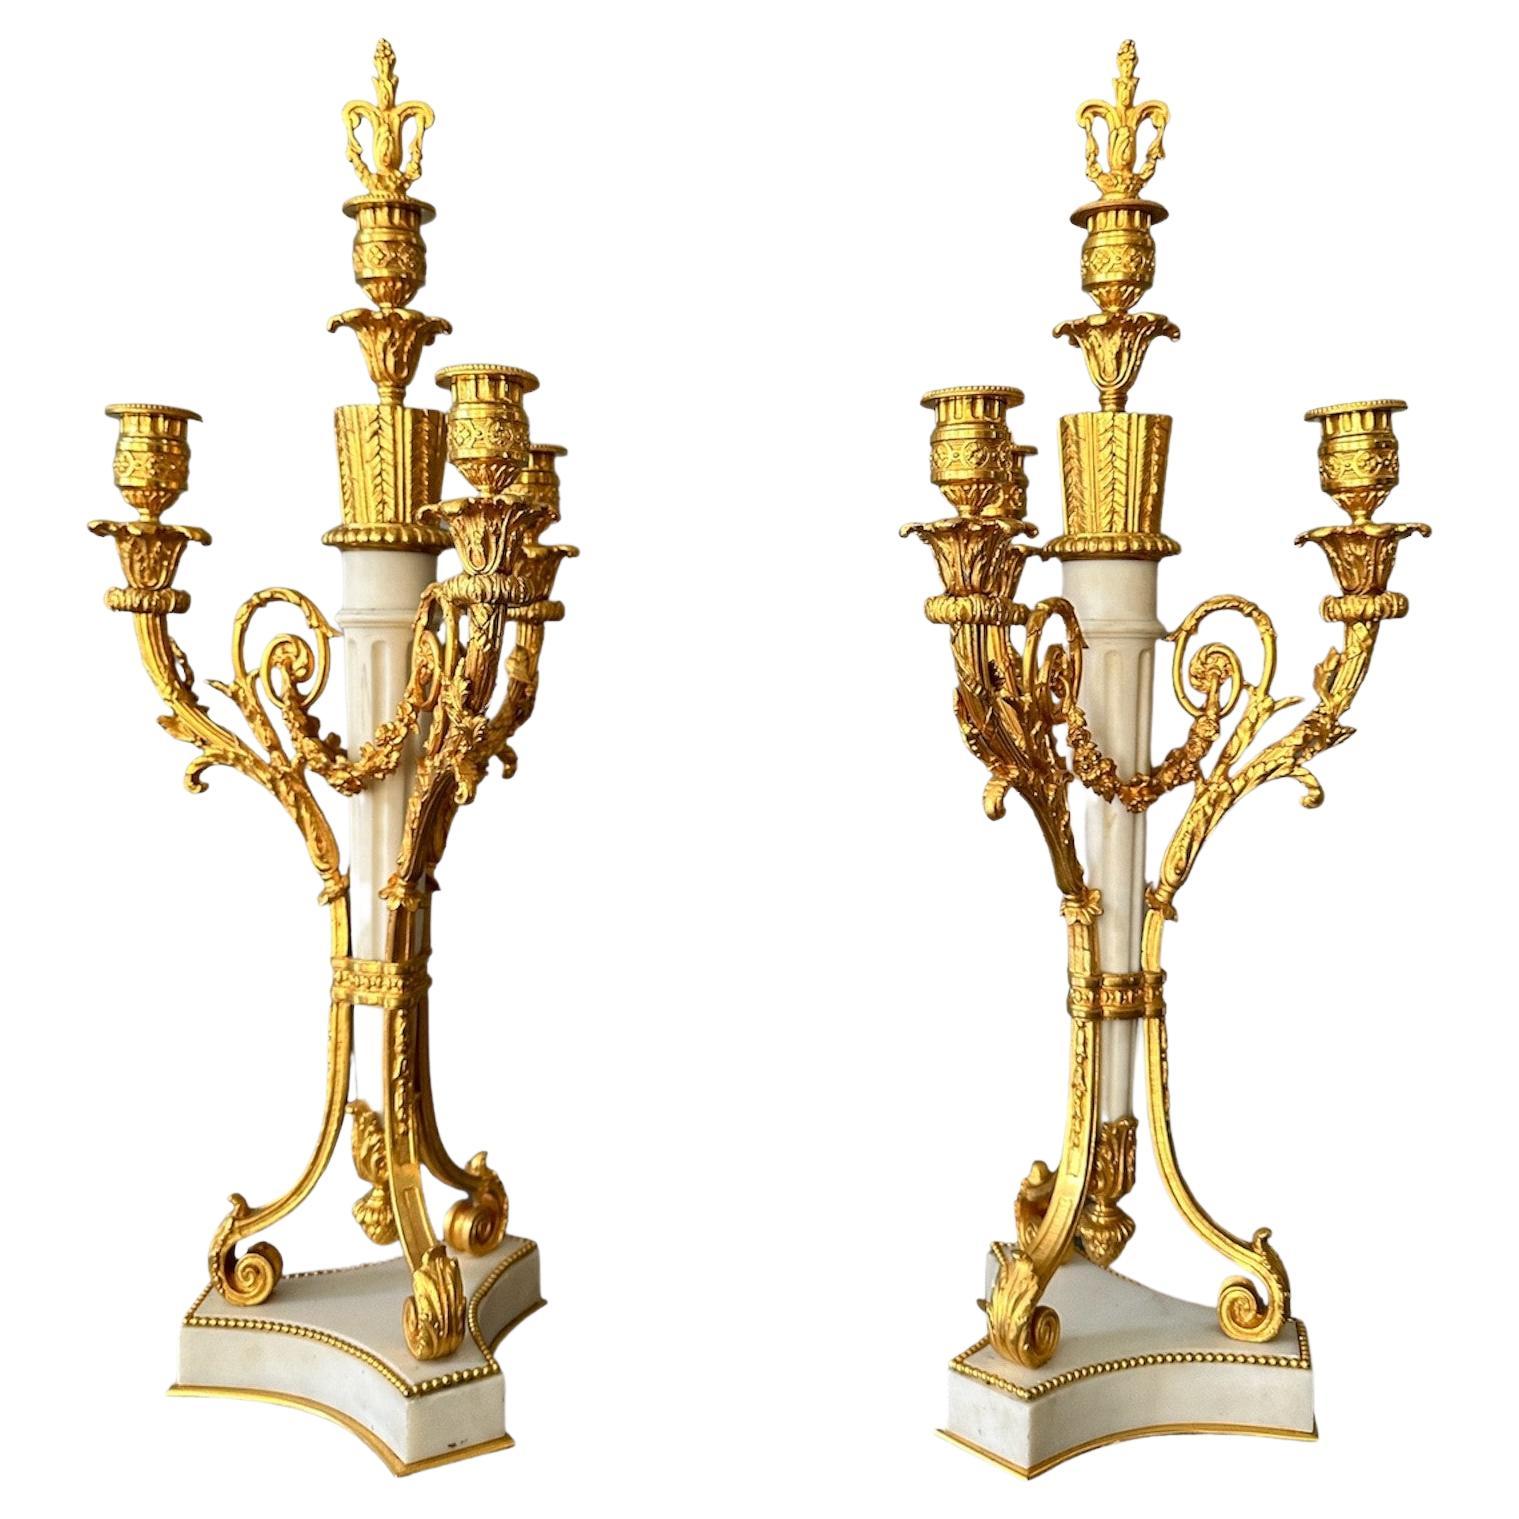 19th century, Napoleon III, Copy of Gilt Bronze and Marble Candelabra For Sale